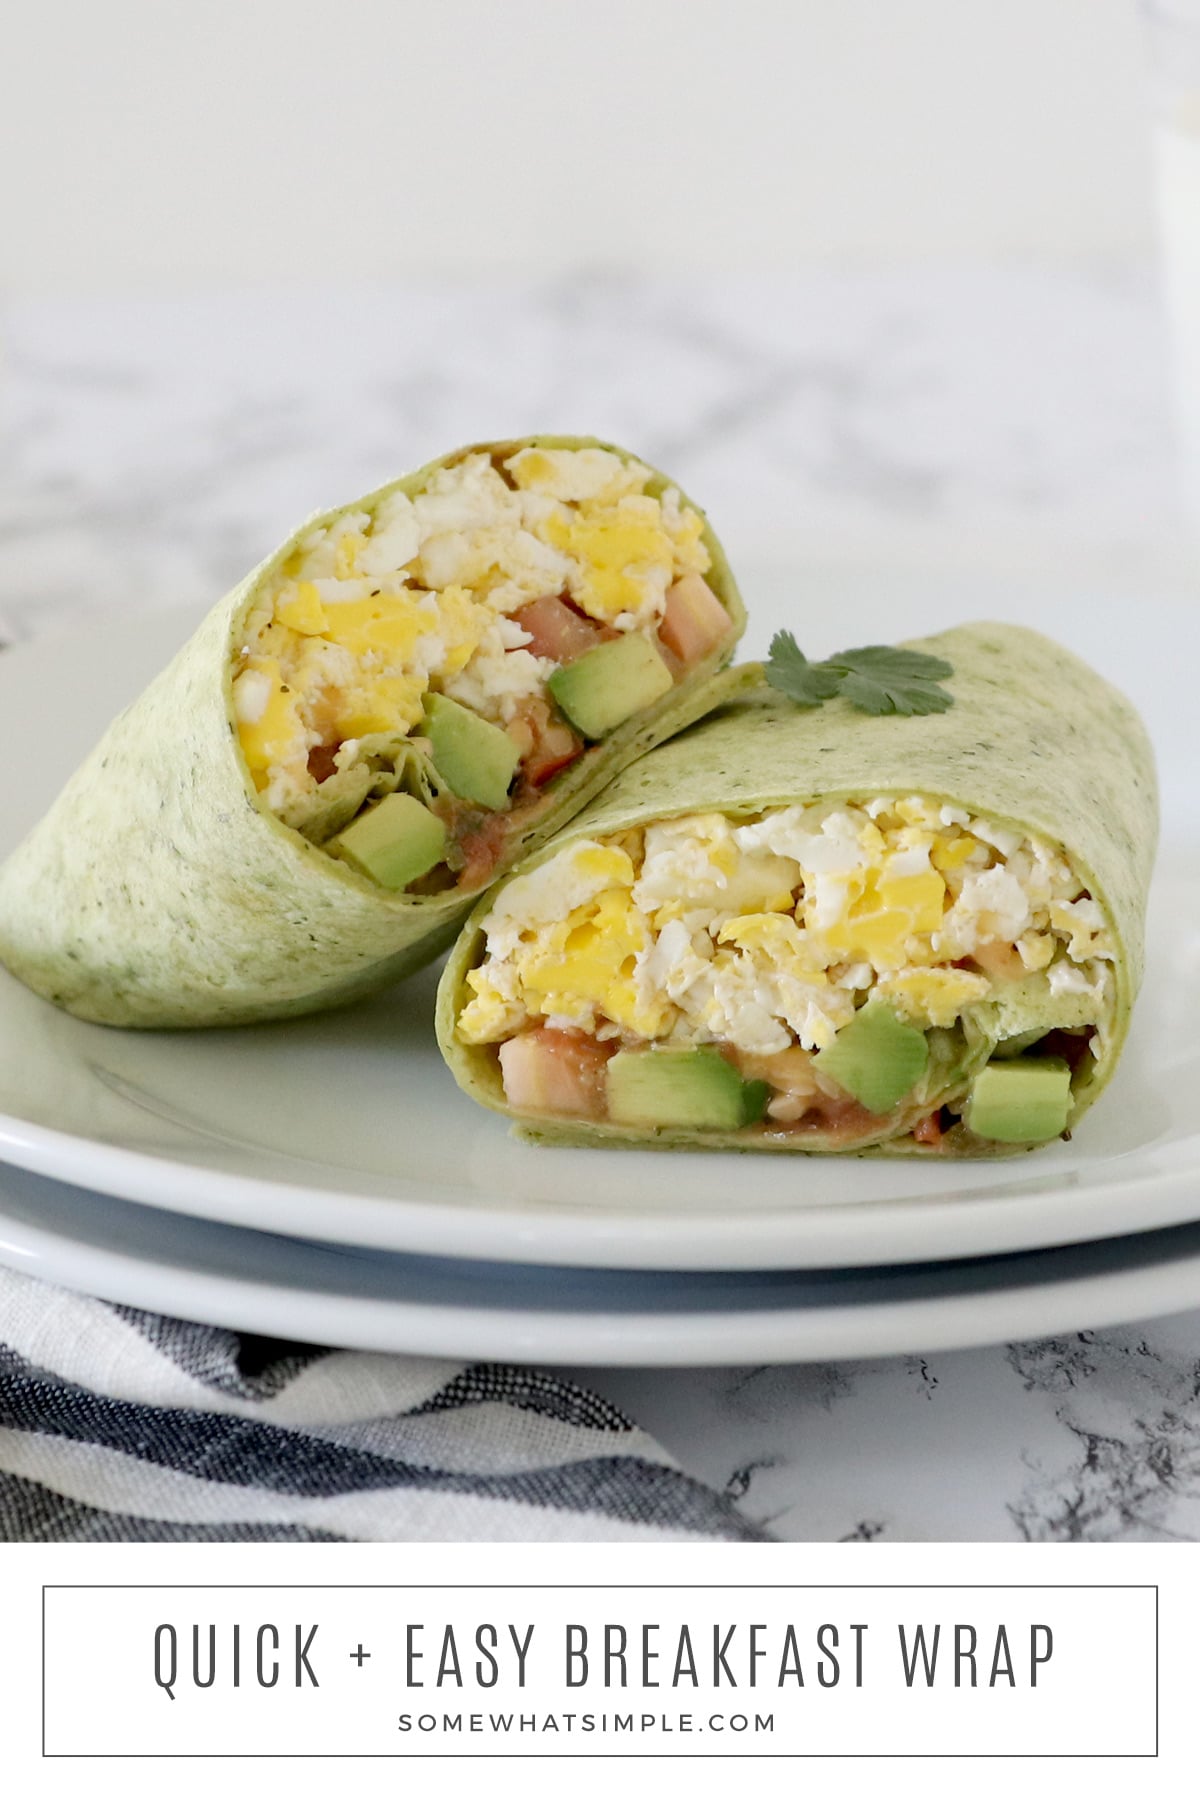 Making a Breakfast Wrap is a simple breakfast idea that's fast, filling, healthy, and totally delicious! Here's how to do it- via @somewhatsimple